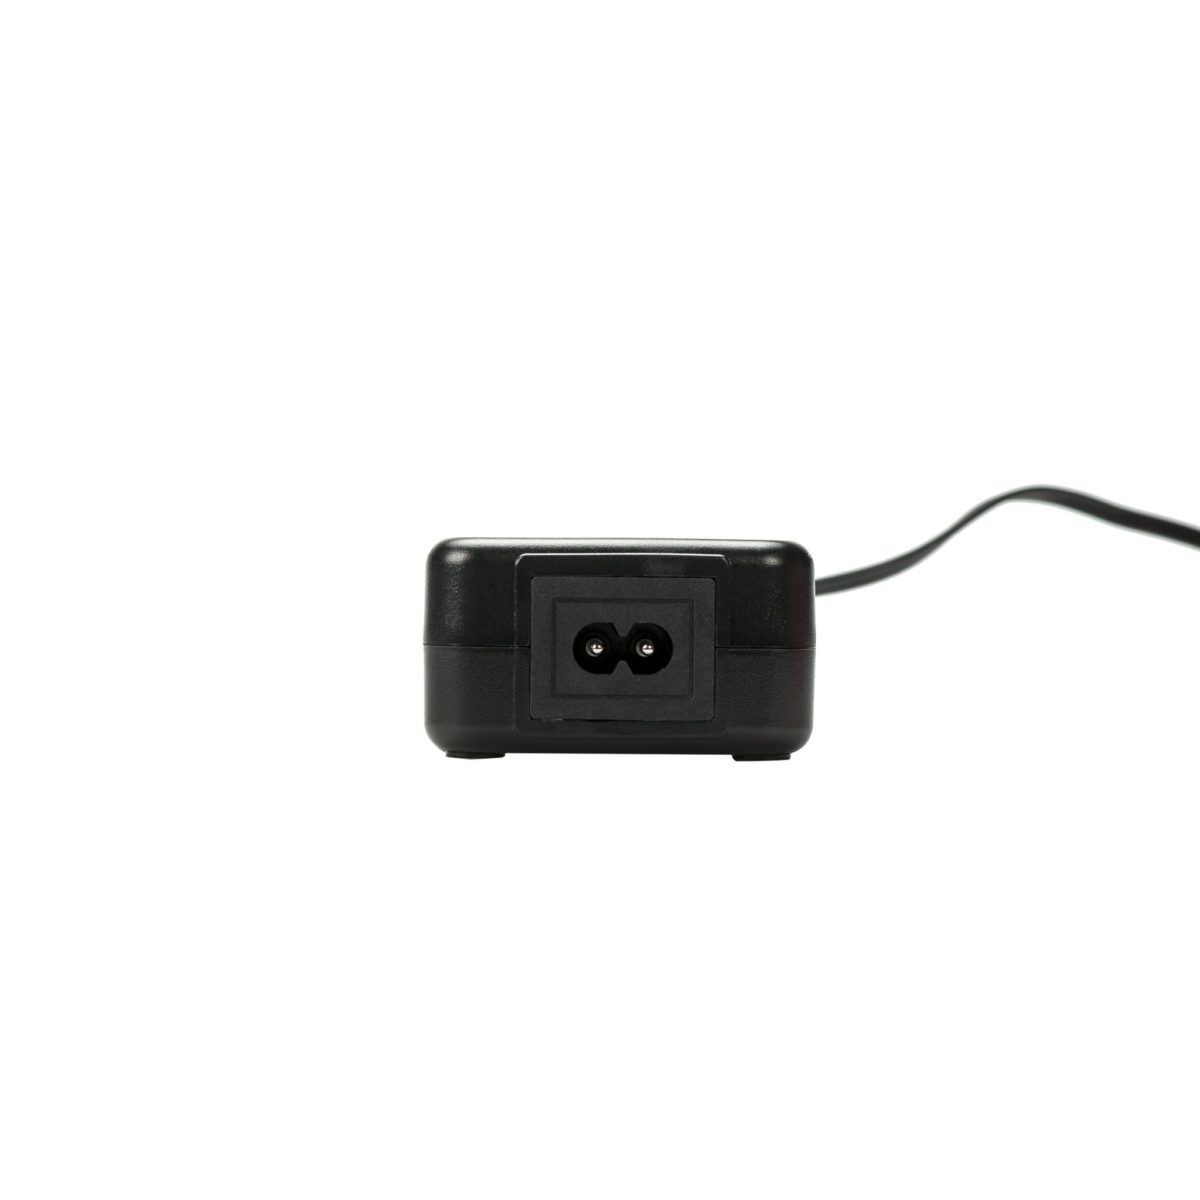 Rebelcell charger 14.6V3A product image